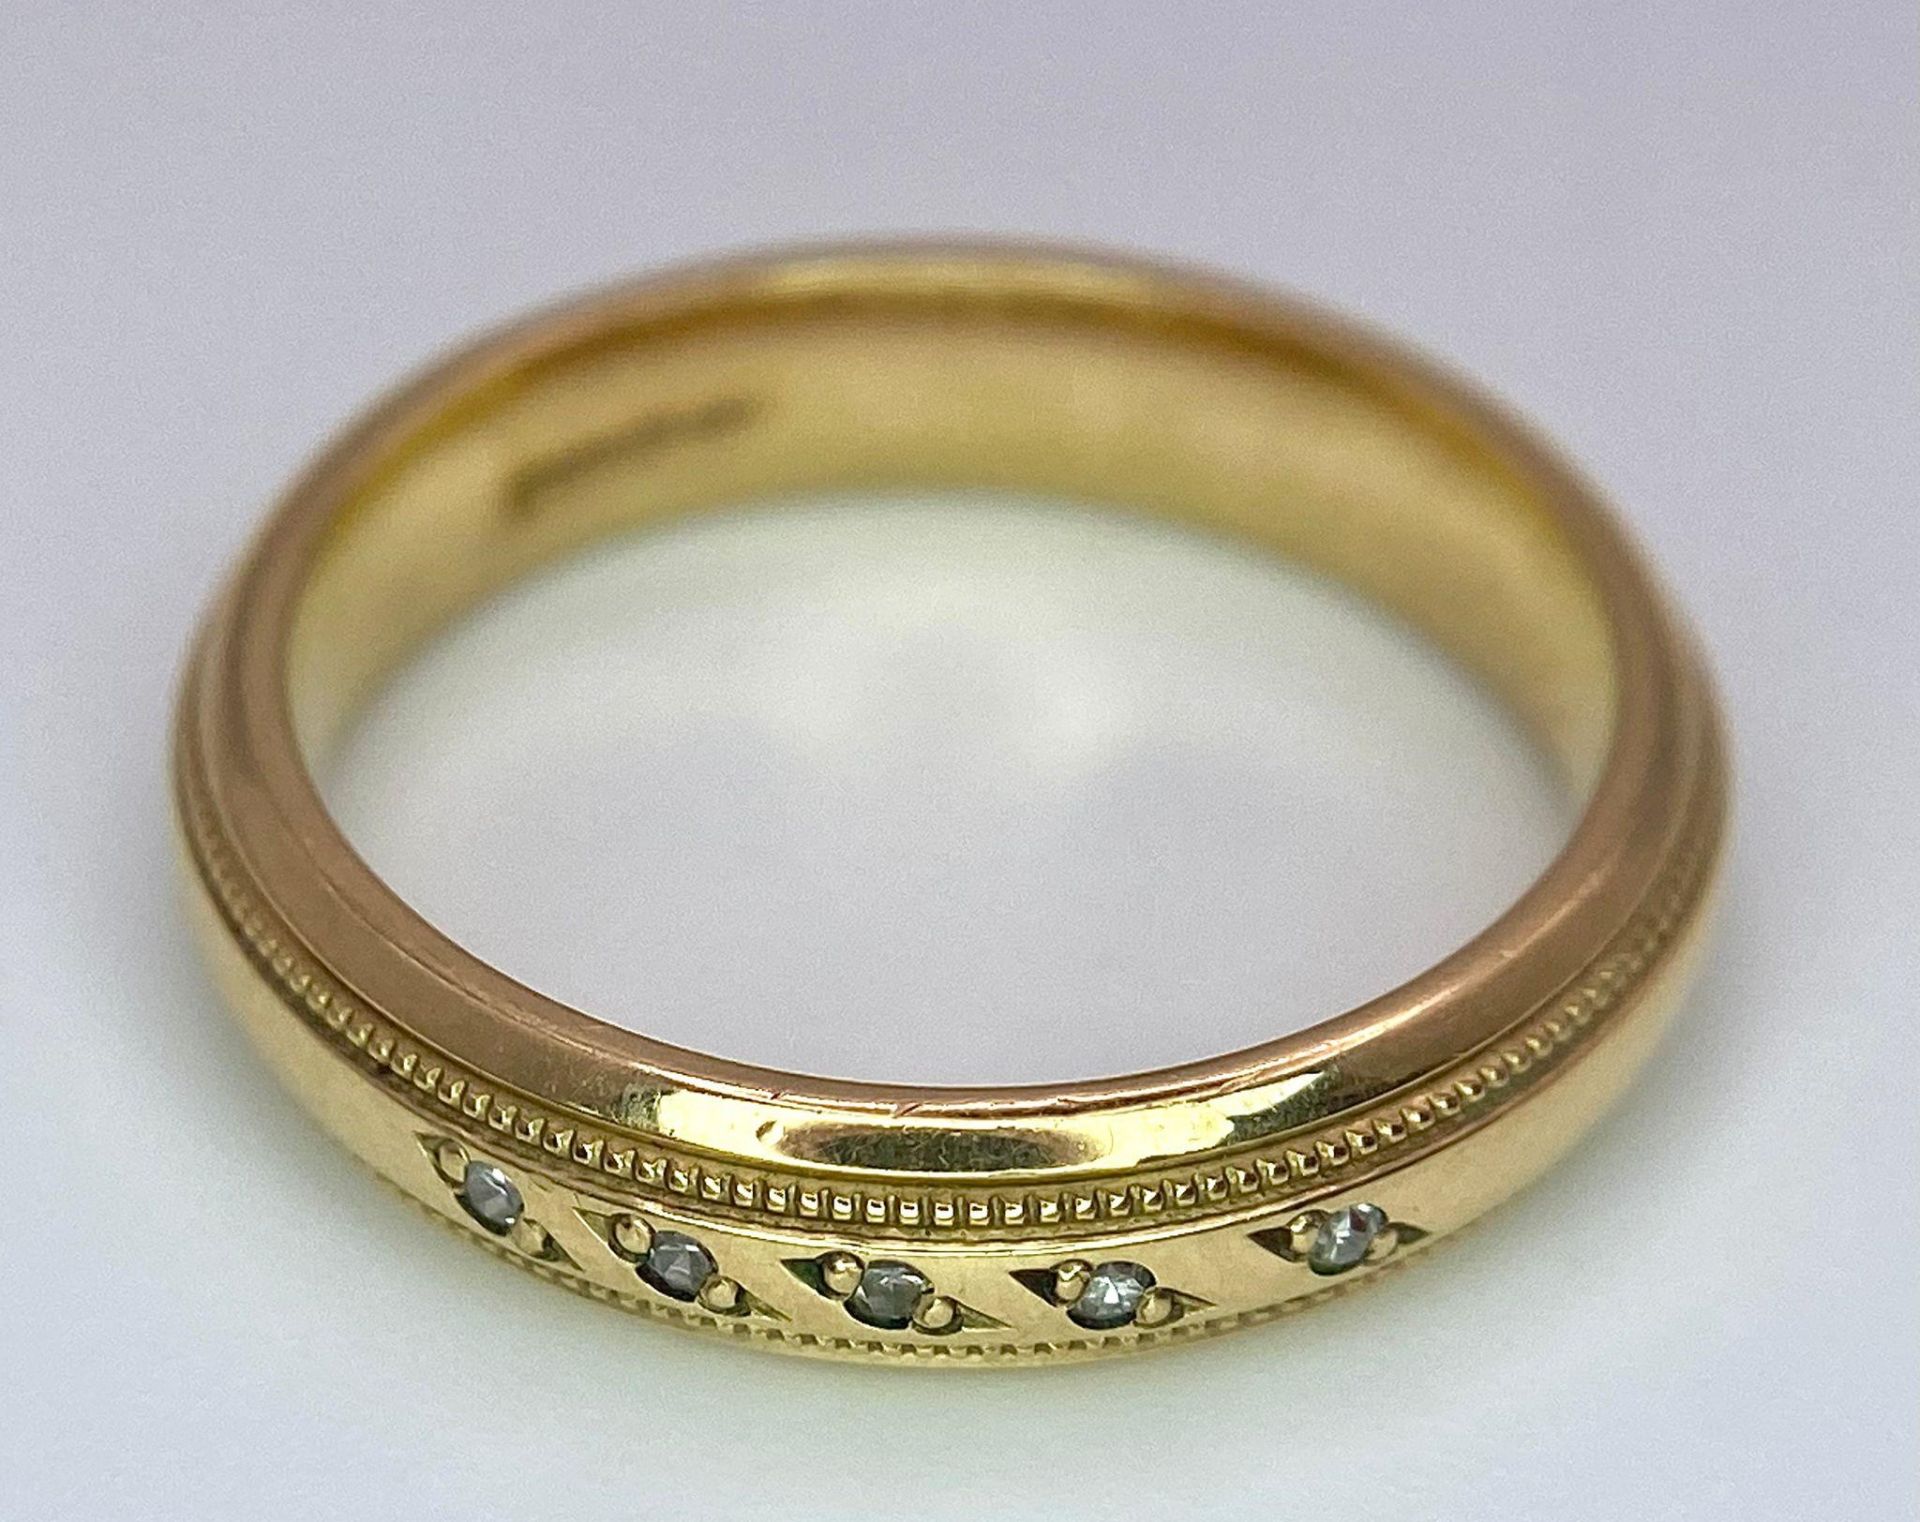 A Vintage 9K Yellow Gold Five Stone Diamond Ring. Size L. 3.75g weight. Full UK hallmarks. - Image 4 of 6